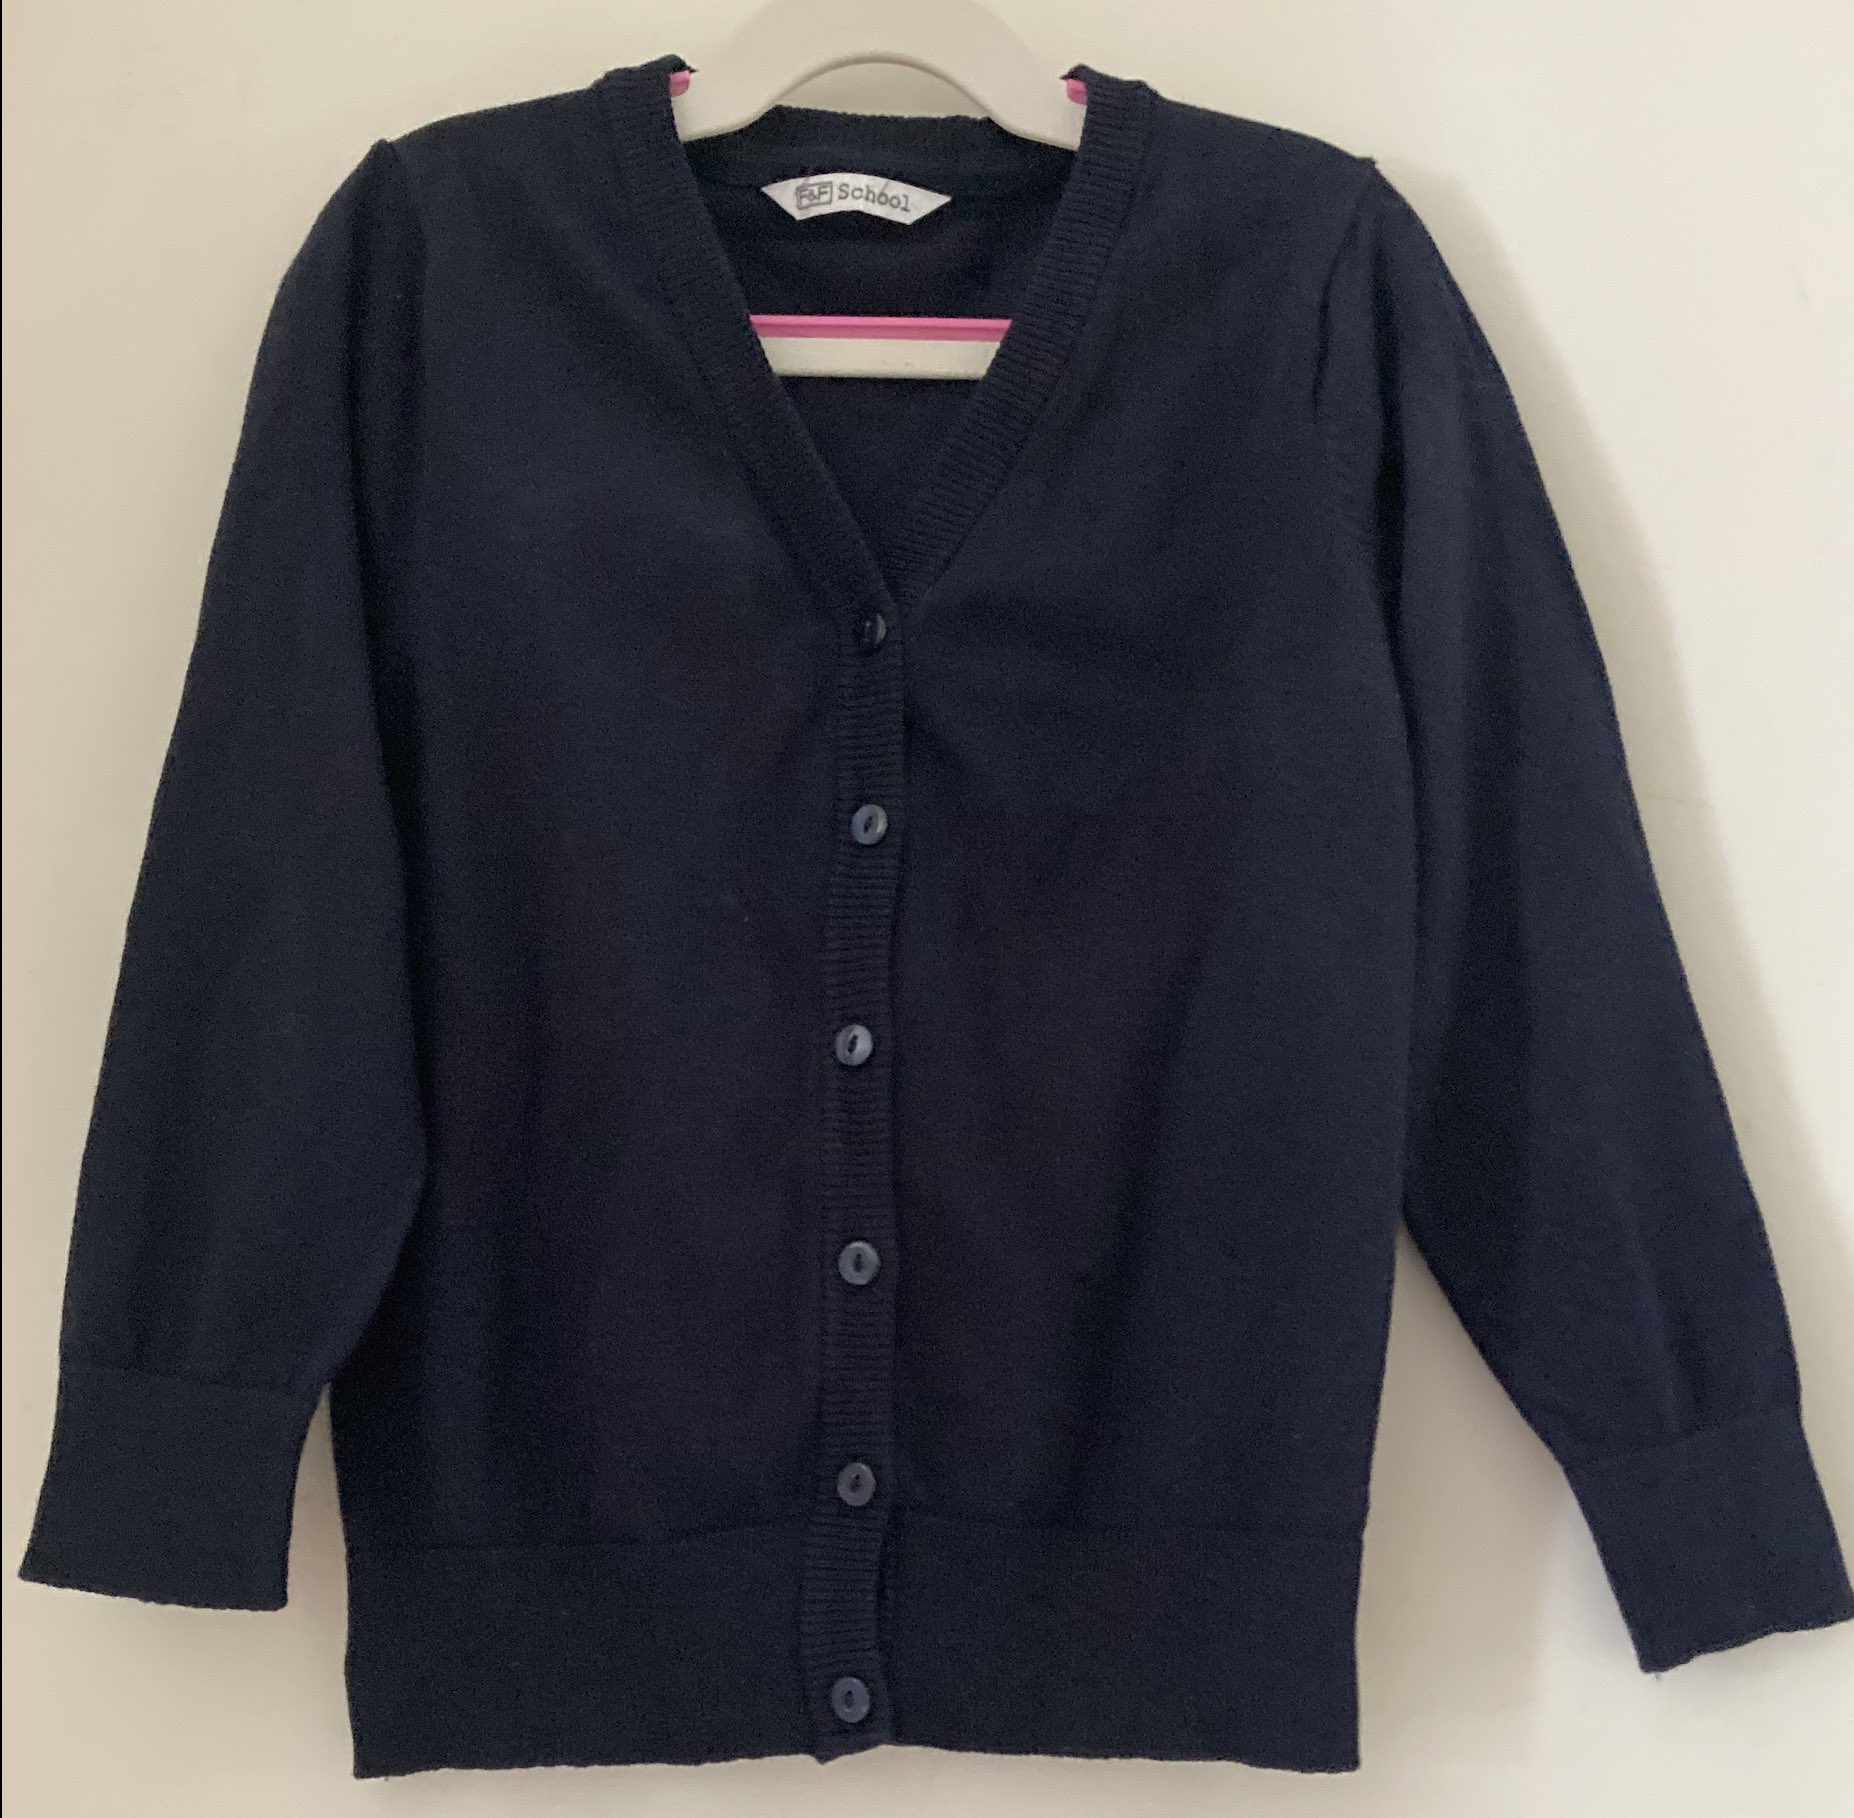 Girls' Navy V-neck Cardigan, Button Front 9-10 Y